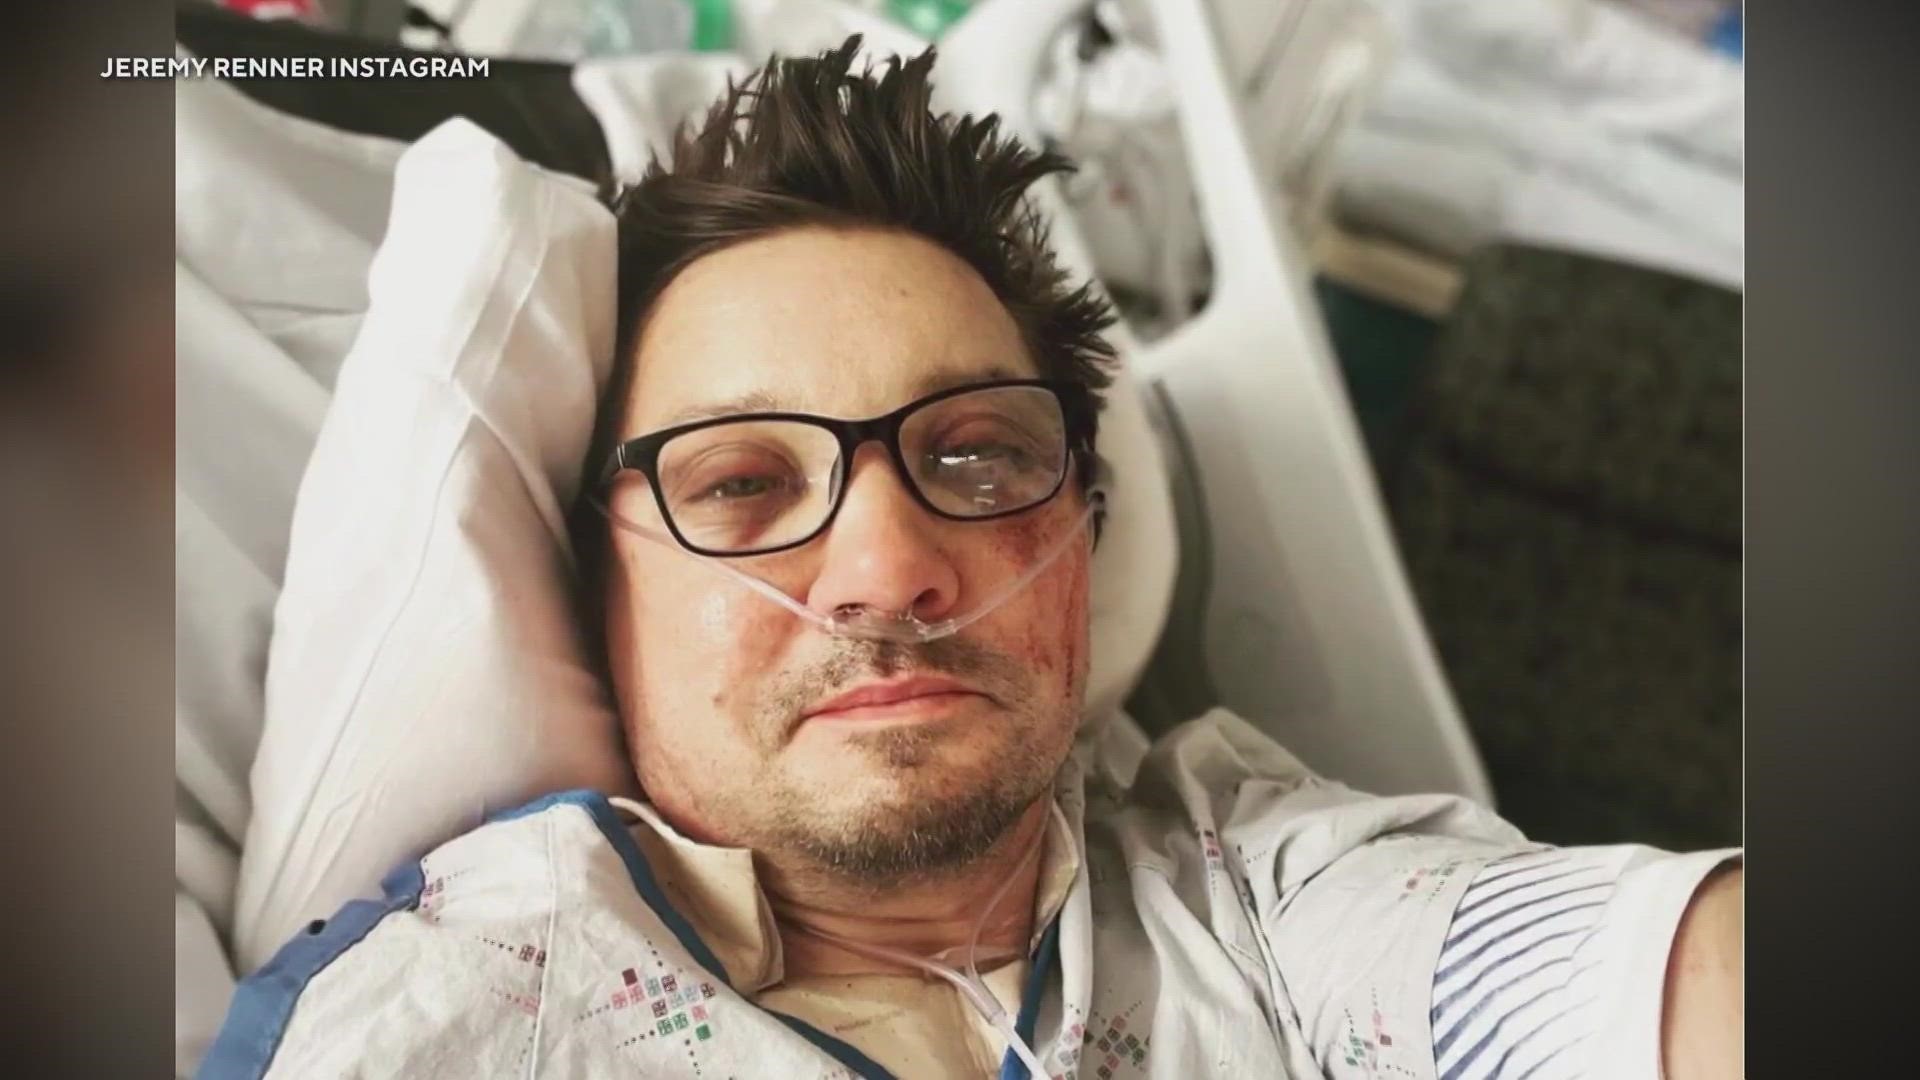 The 'Avengers' star posted on Instagram Sunday that he broke more than 30 bones in the snowplow accident on New Year's Day.